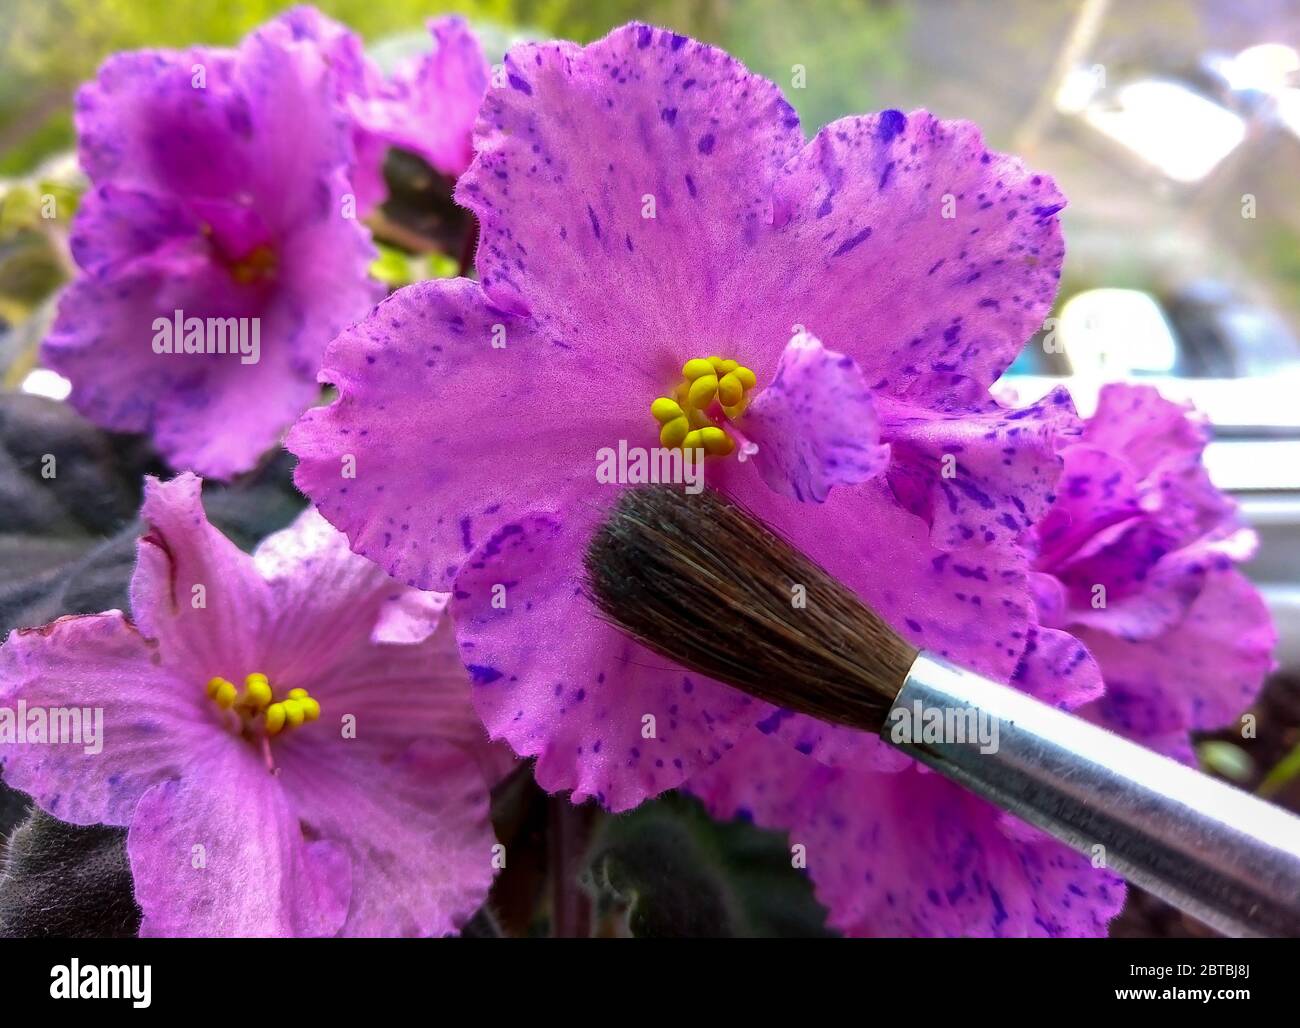 Violet senpolia Rosi with beautiful pink flowers with purple spots and an artist's brush Stock Photo